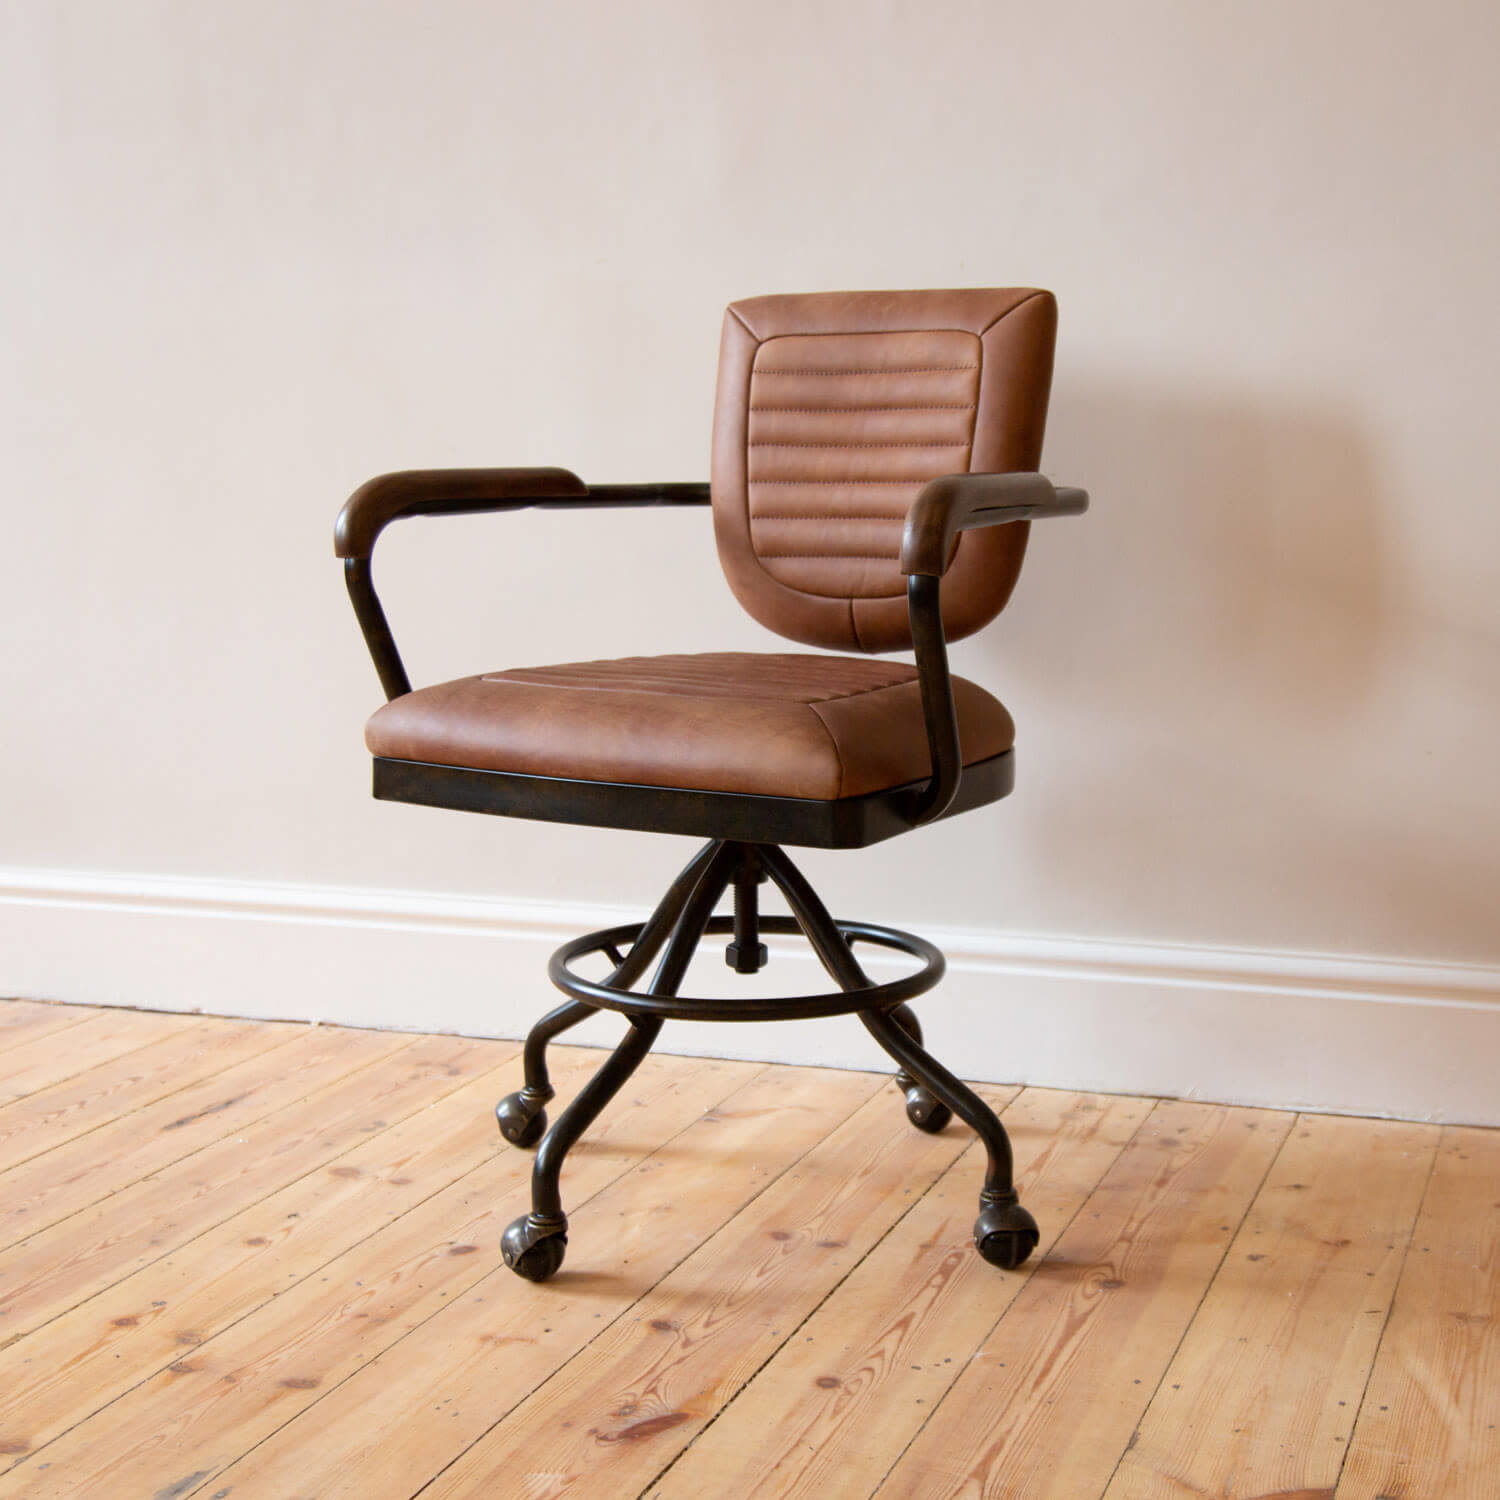 Mustang Leather Office Chair Trading, Cool Leather Office Chairs